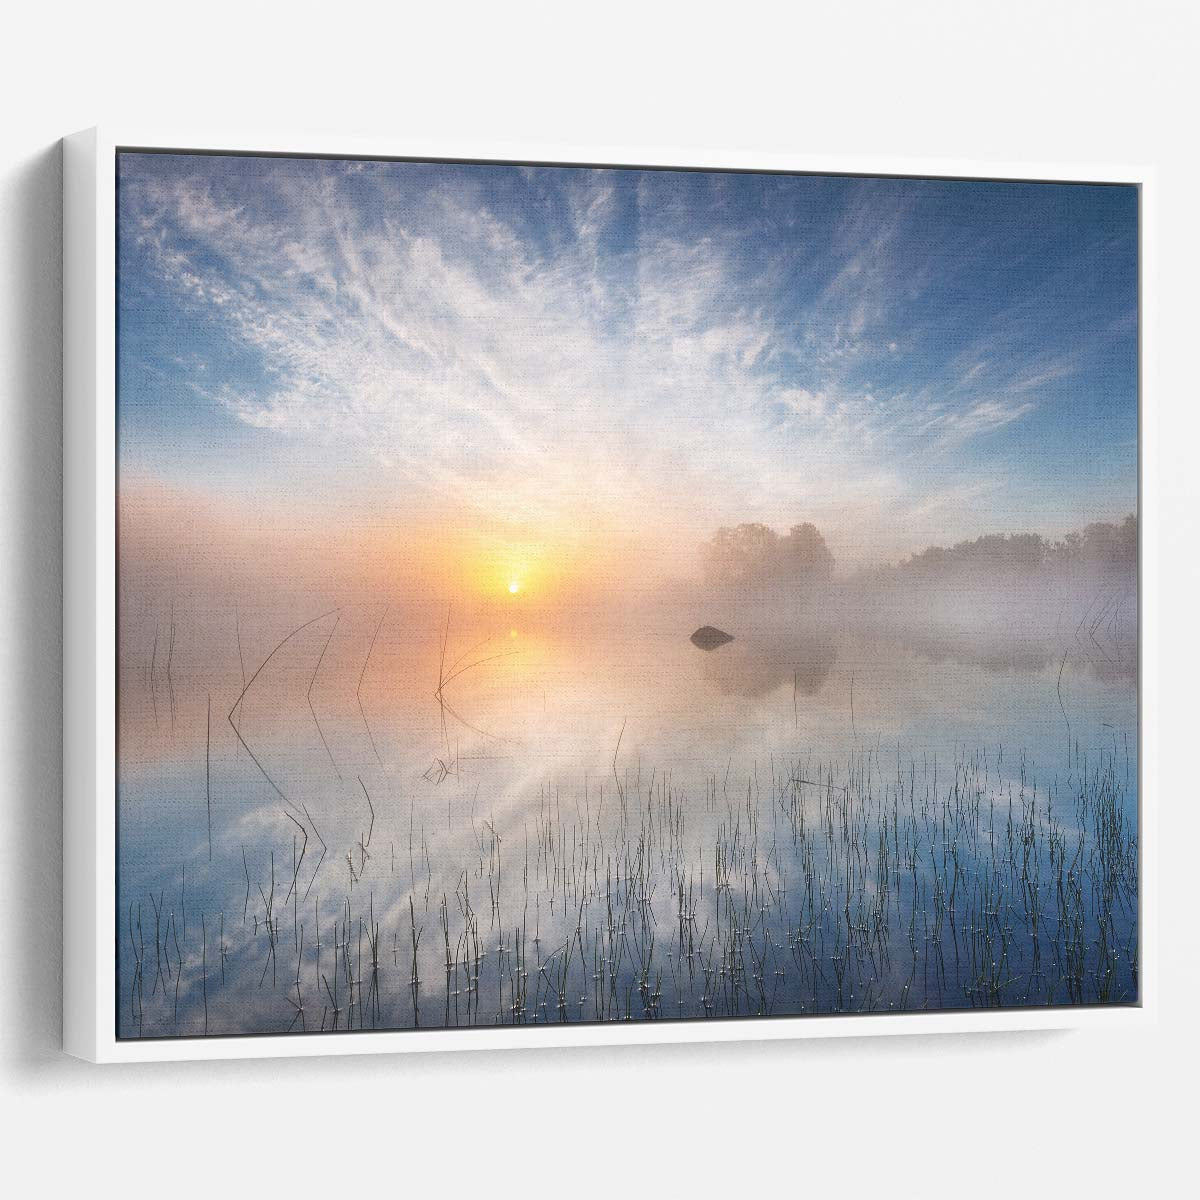 Misty Sunrise Lake Reflection Landscape Wall Art by Luxuriance Designs. Made in USA.